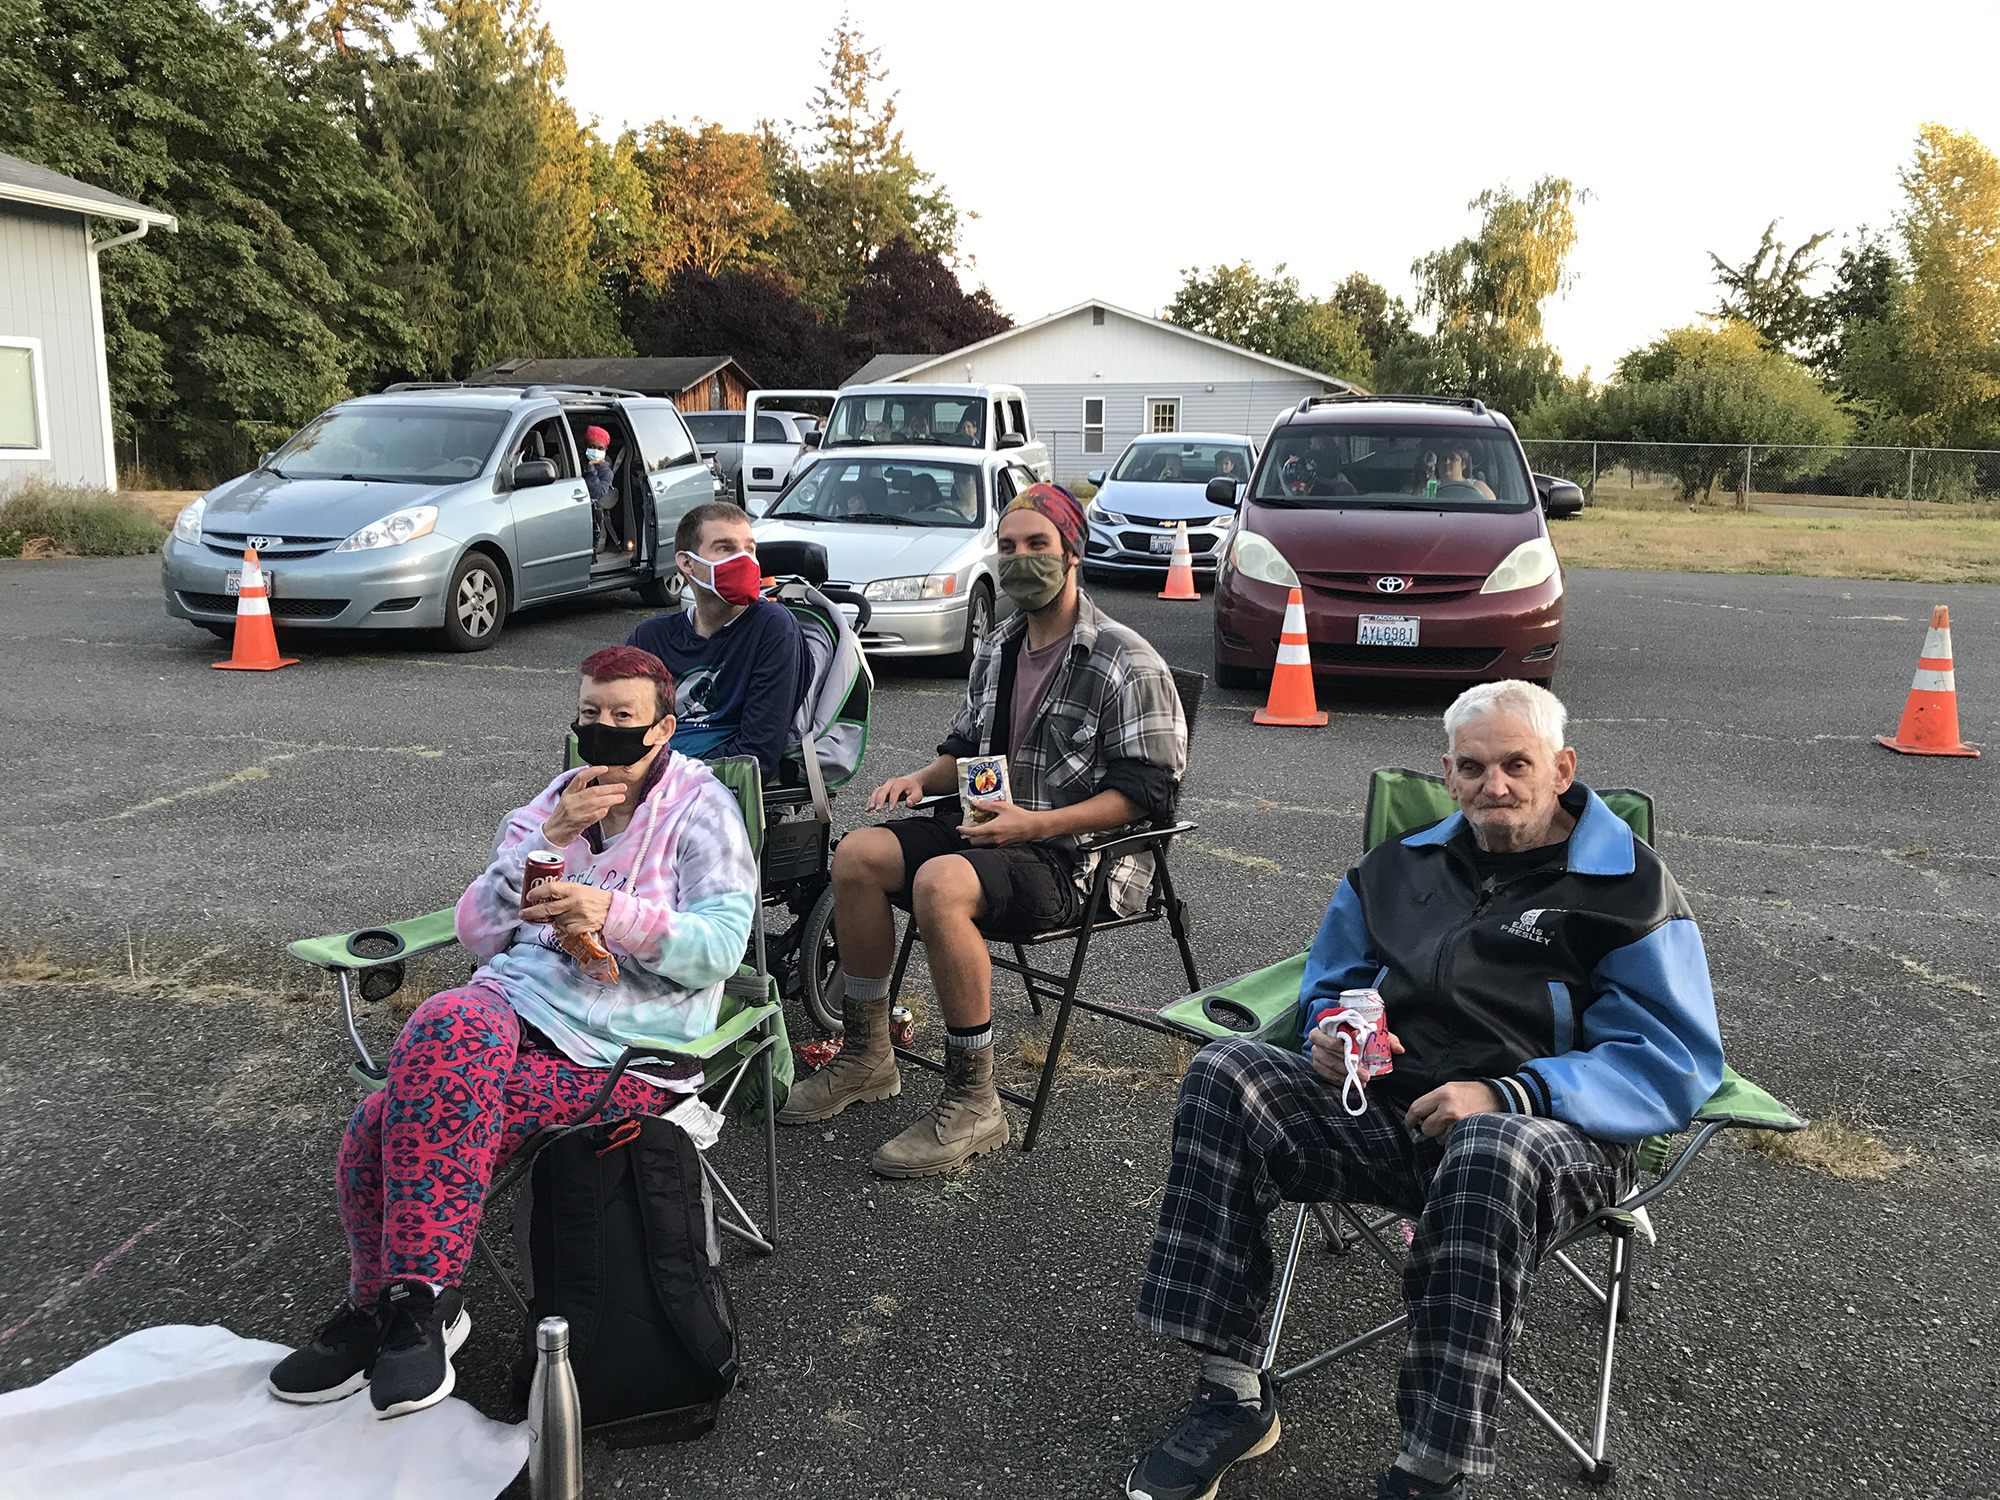 "Customers" are getting settled at the Camp L'Arche drive-in.